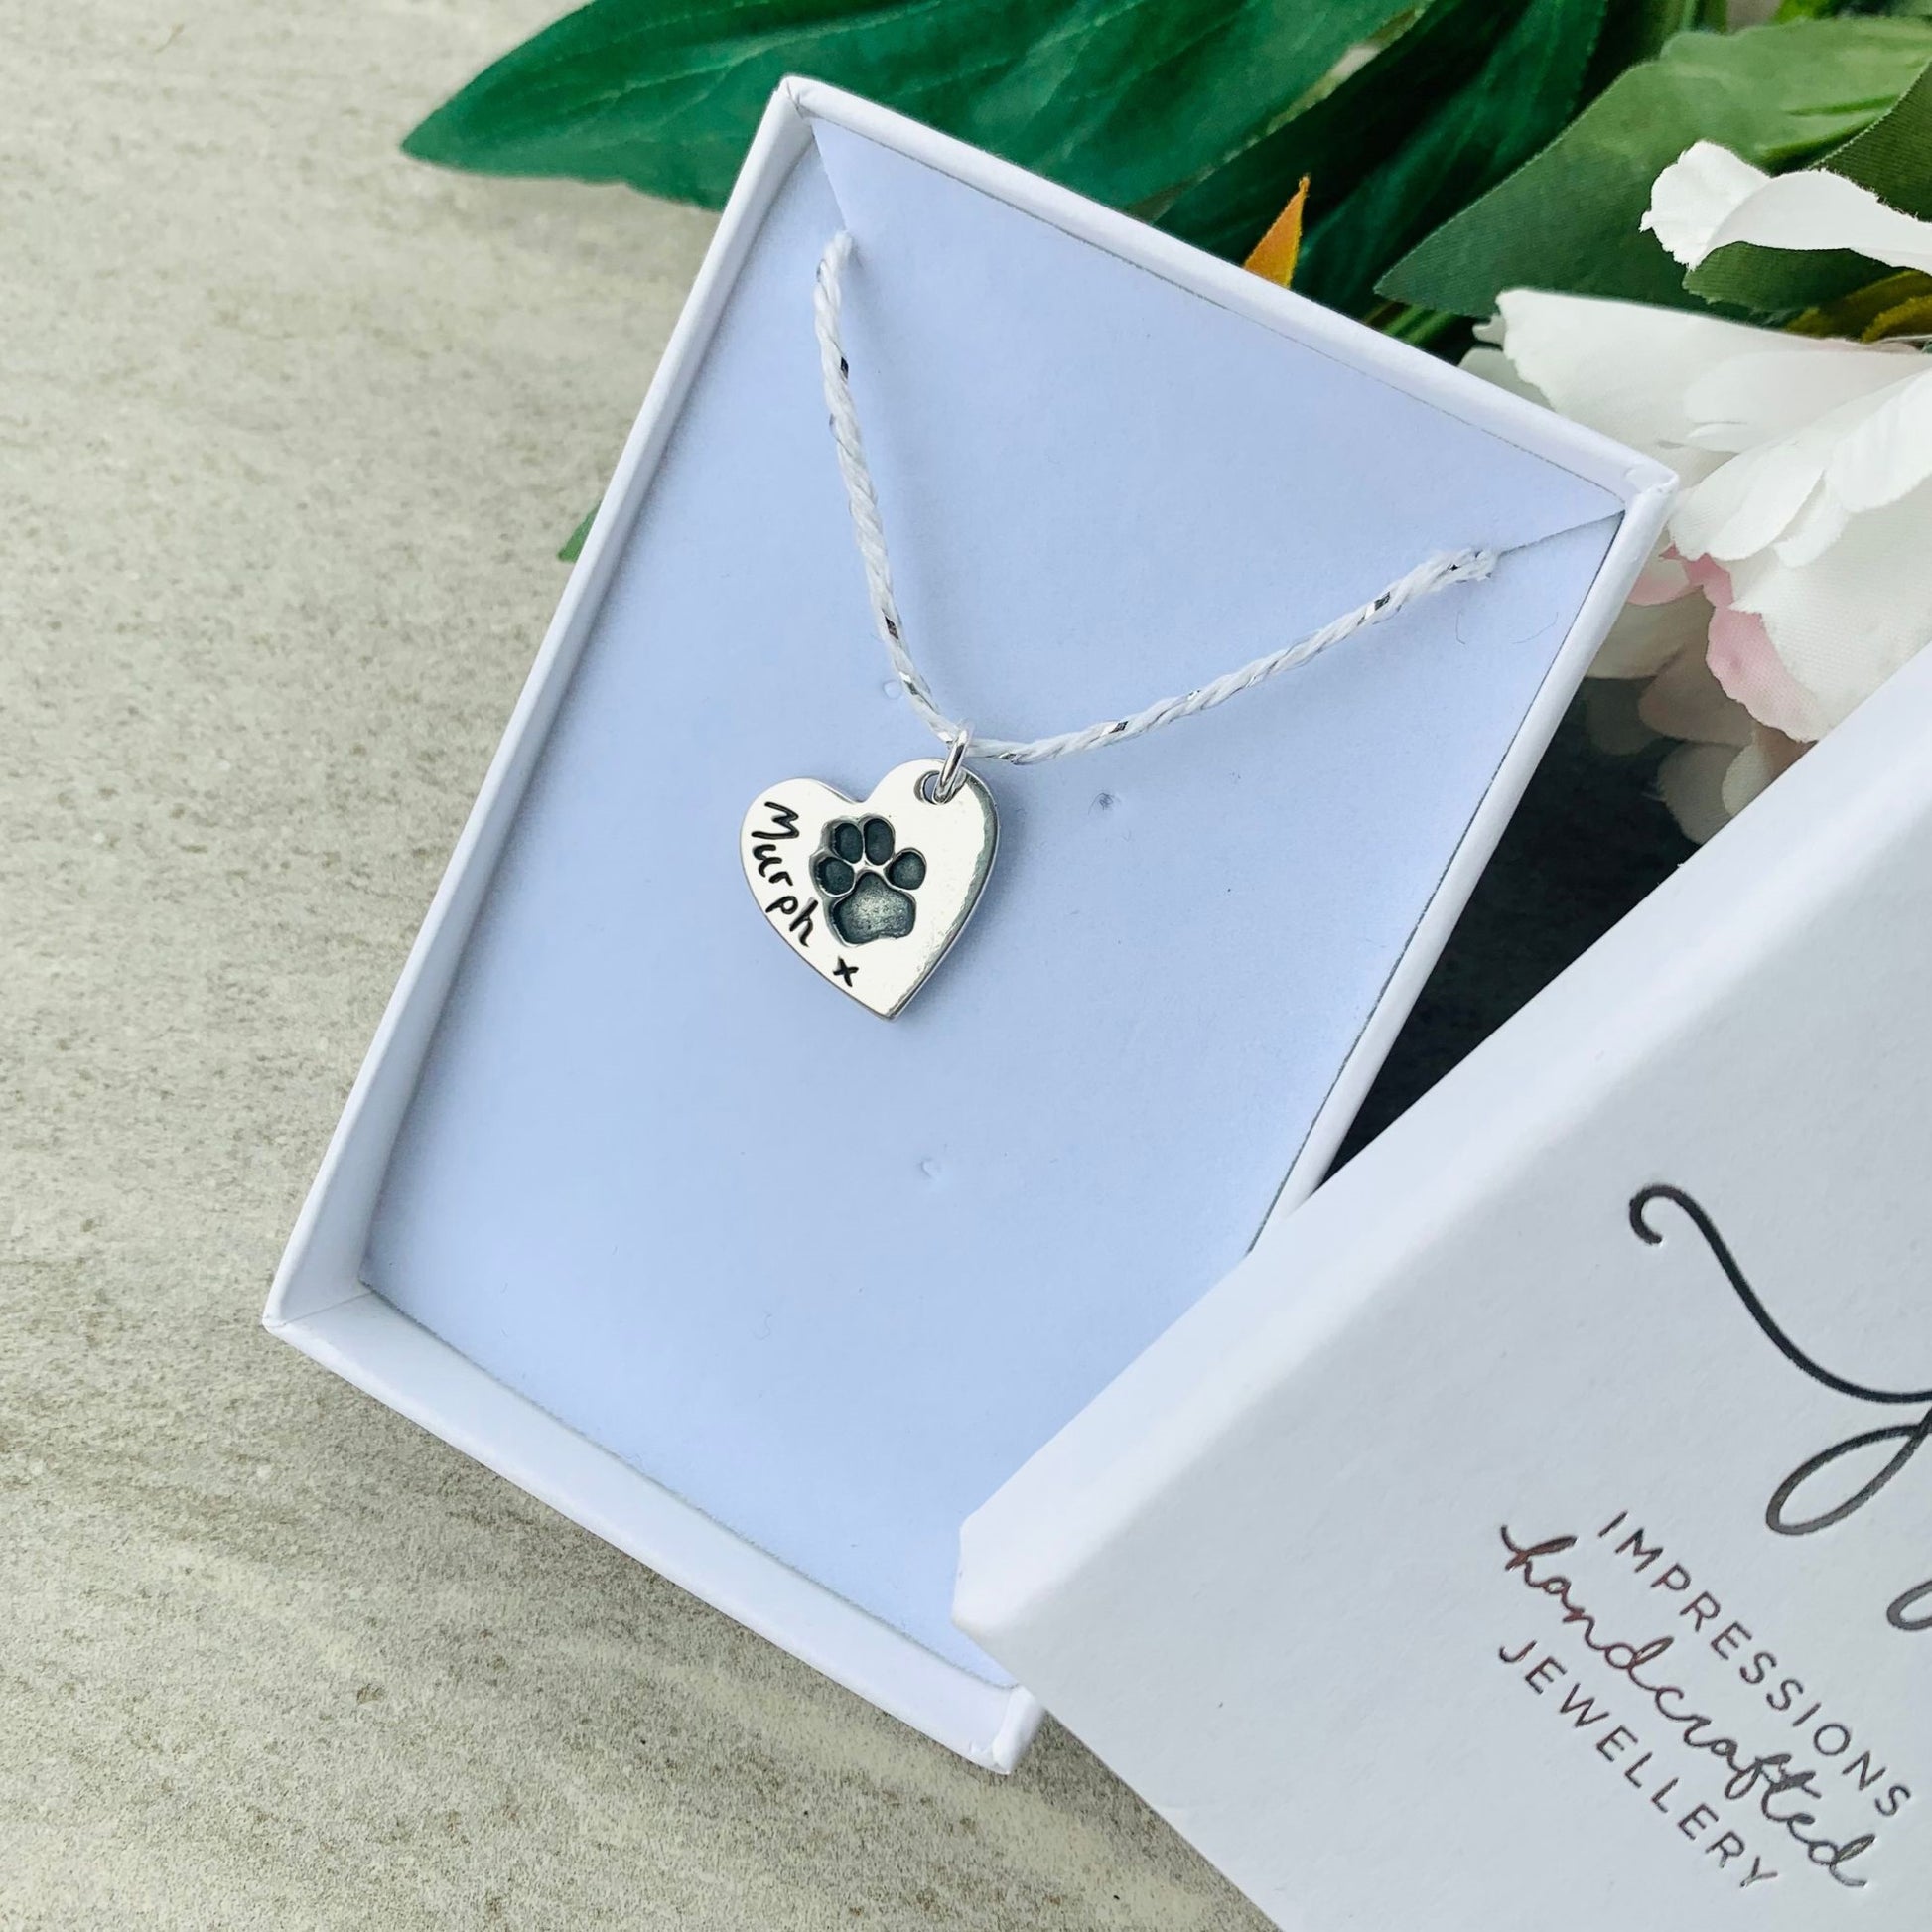 Pawprint Heart Charm using your pets pawprints by Joy Impressions